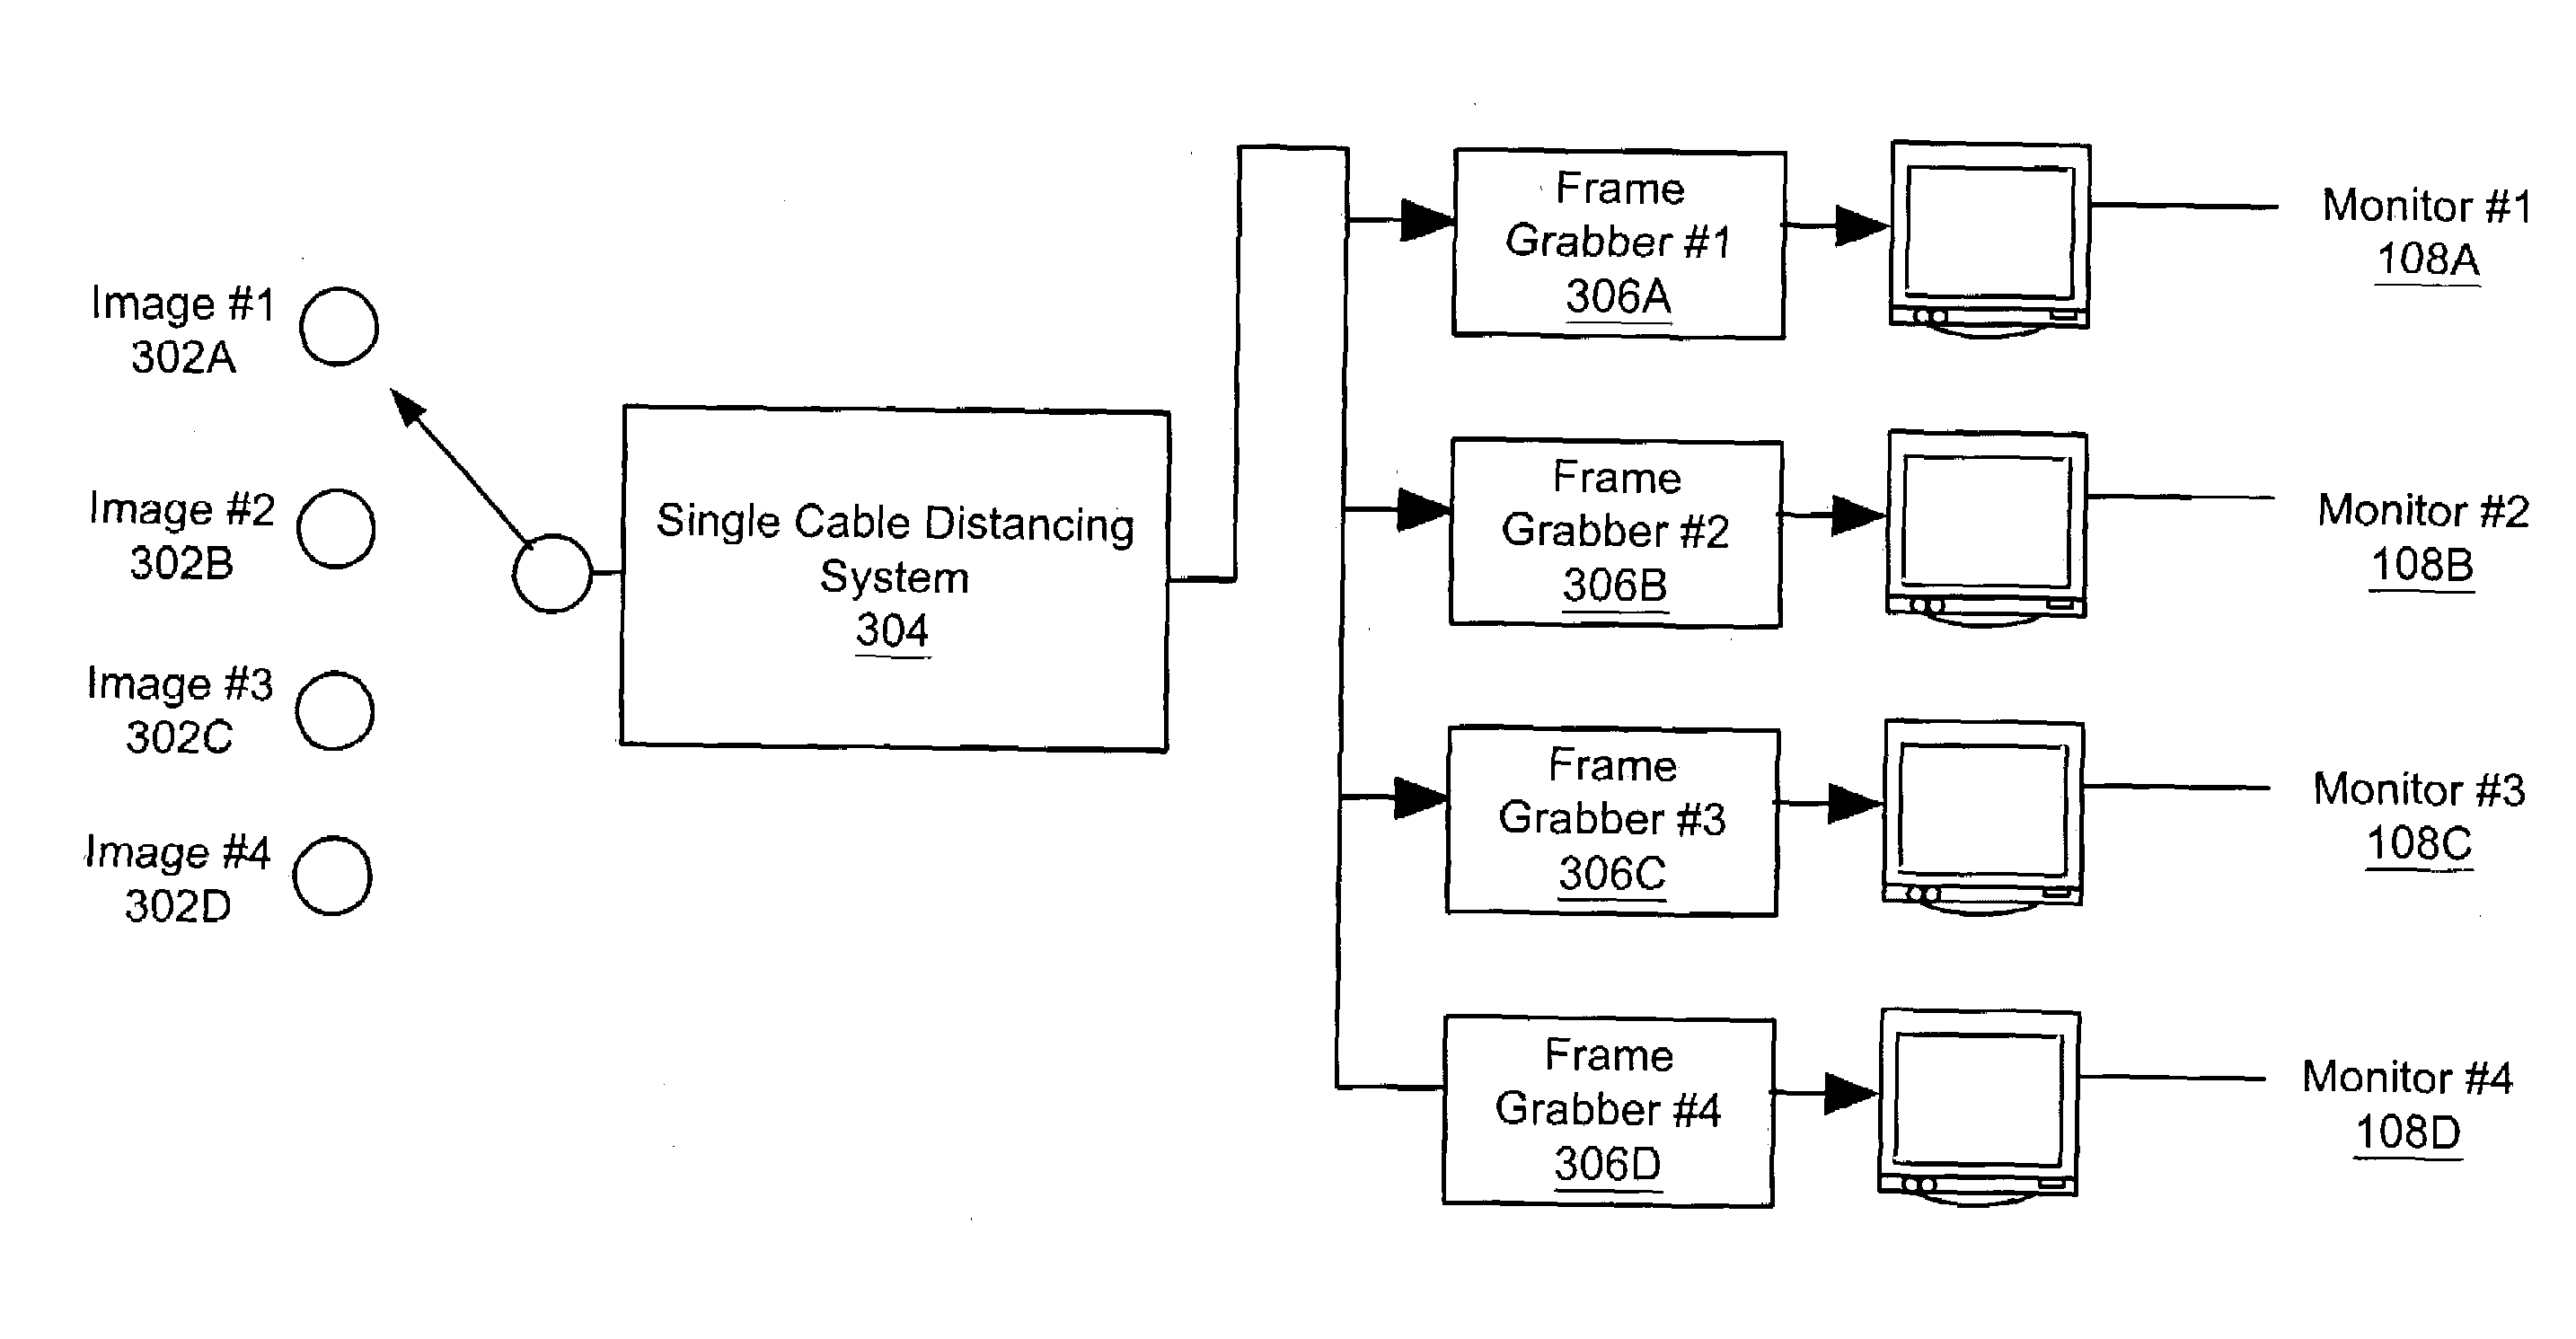 Selectively updating a display in a multi-display system